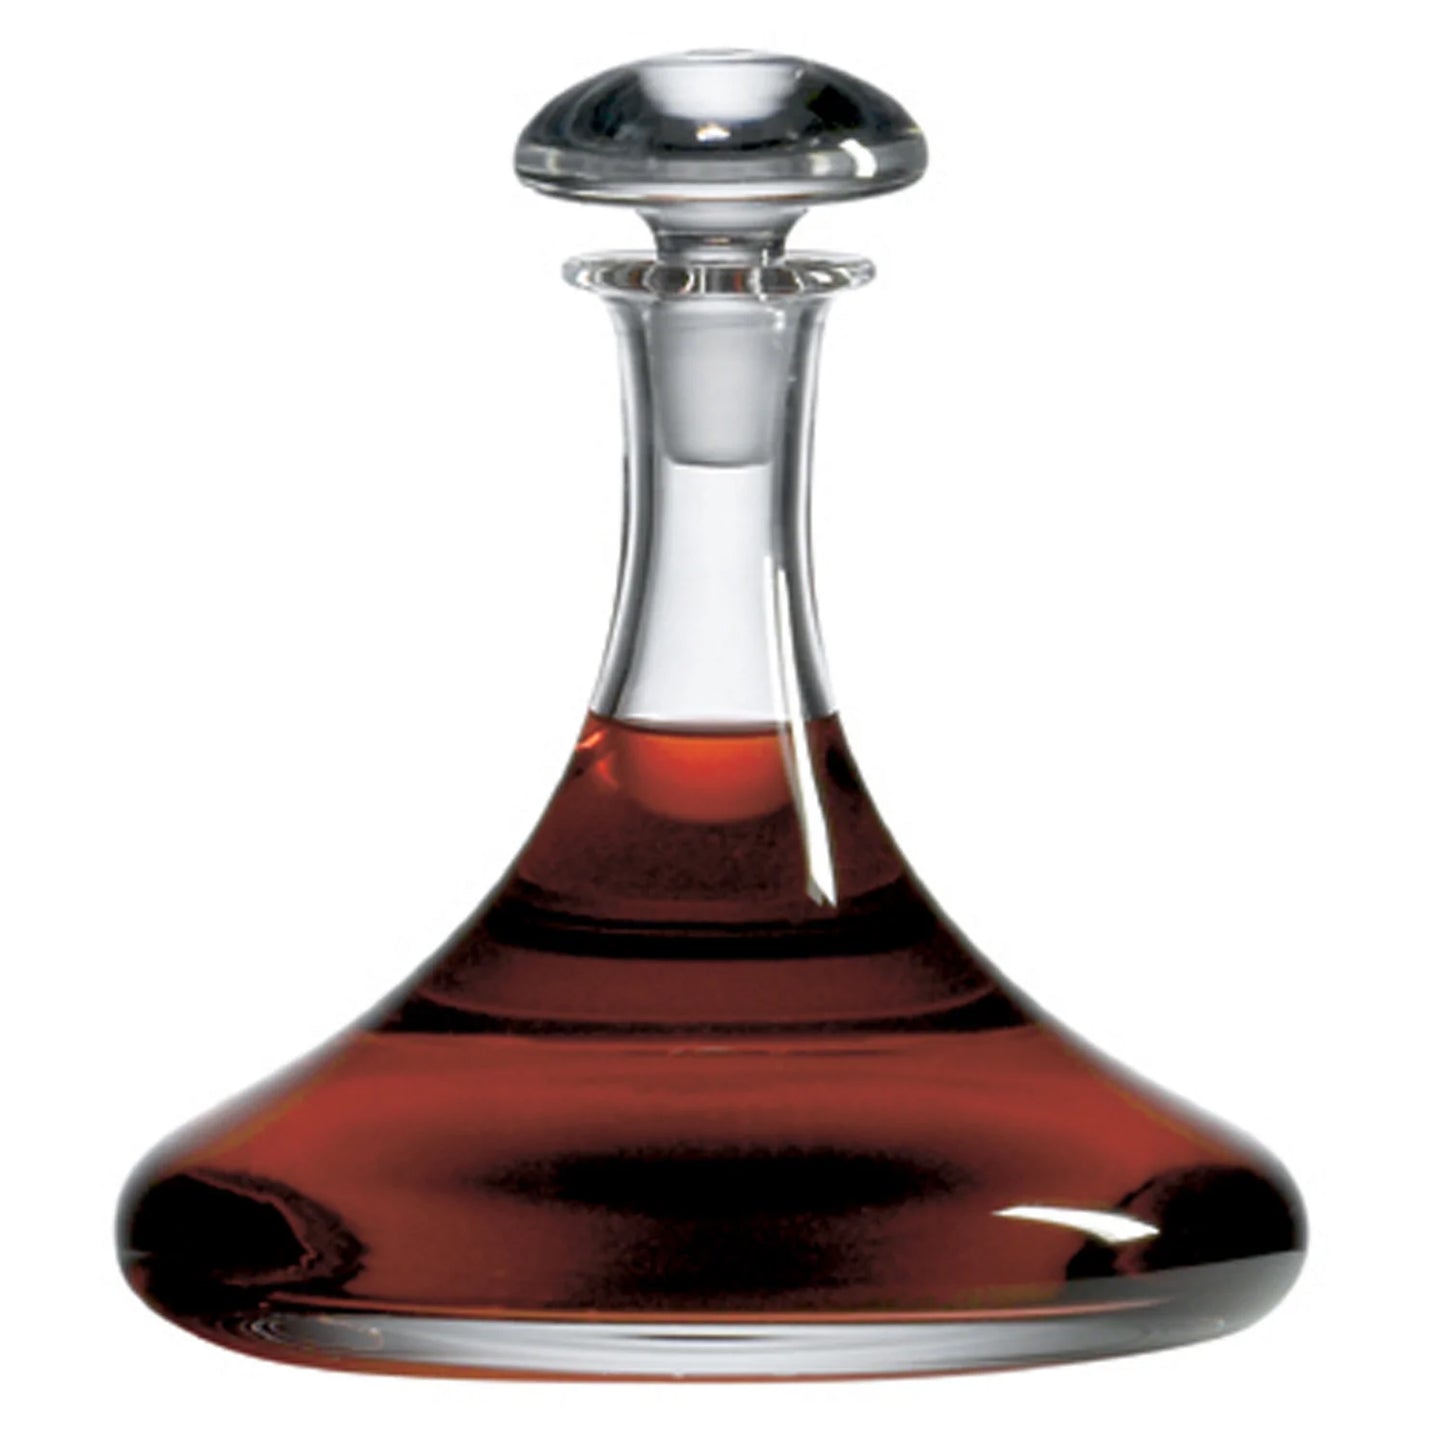 Ravenscroft Crystal Ship's Table Decanter with Free Luxury Satin Decanter and Stopper Bags W2718